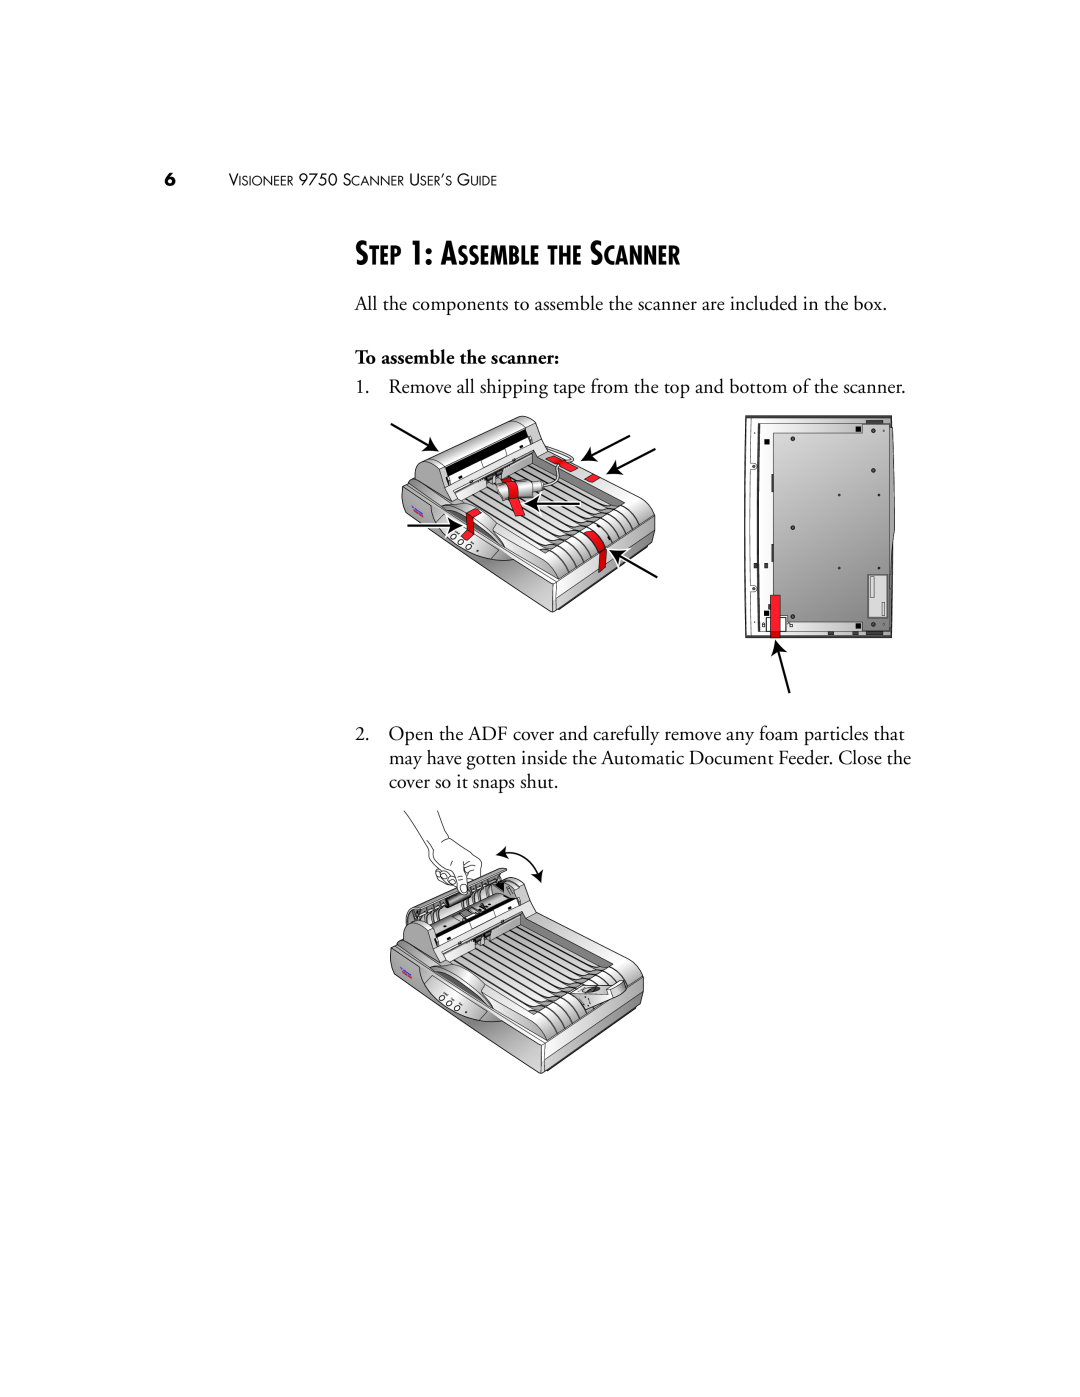 Visioneer manual Assemble The Scanner, To assemble the scanner, VISIONEER 9750 SCANNER USER’S GUIDE 